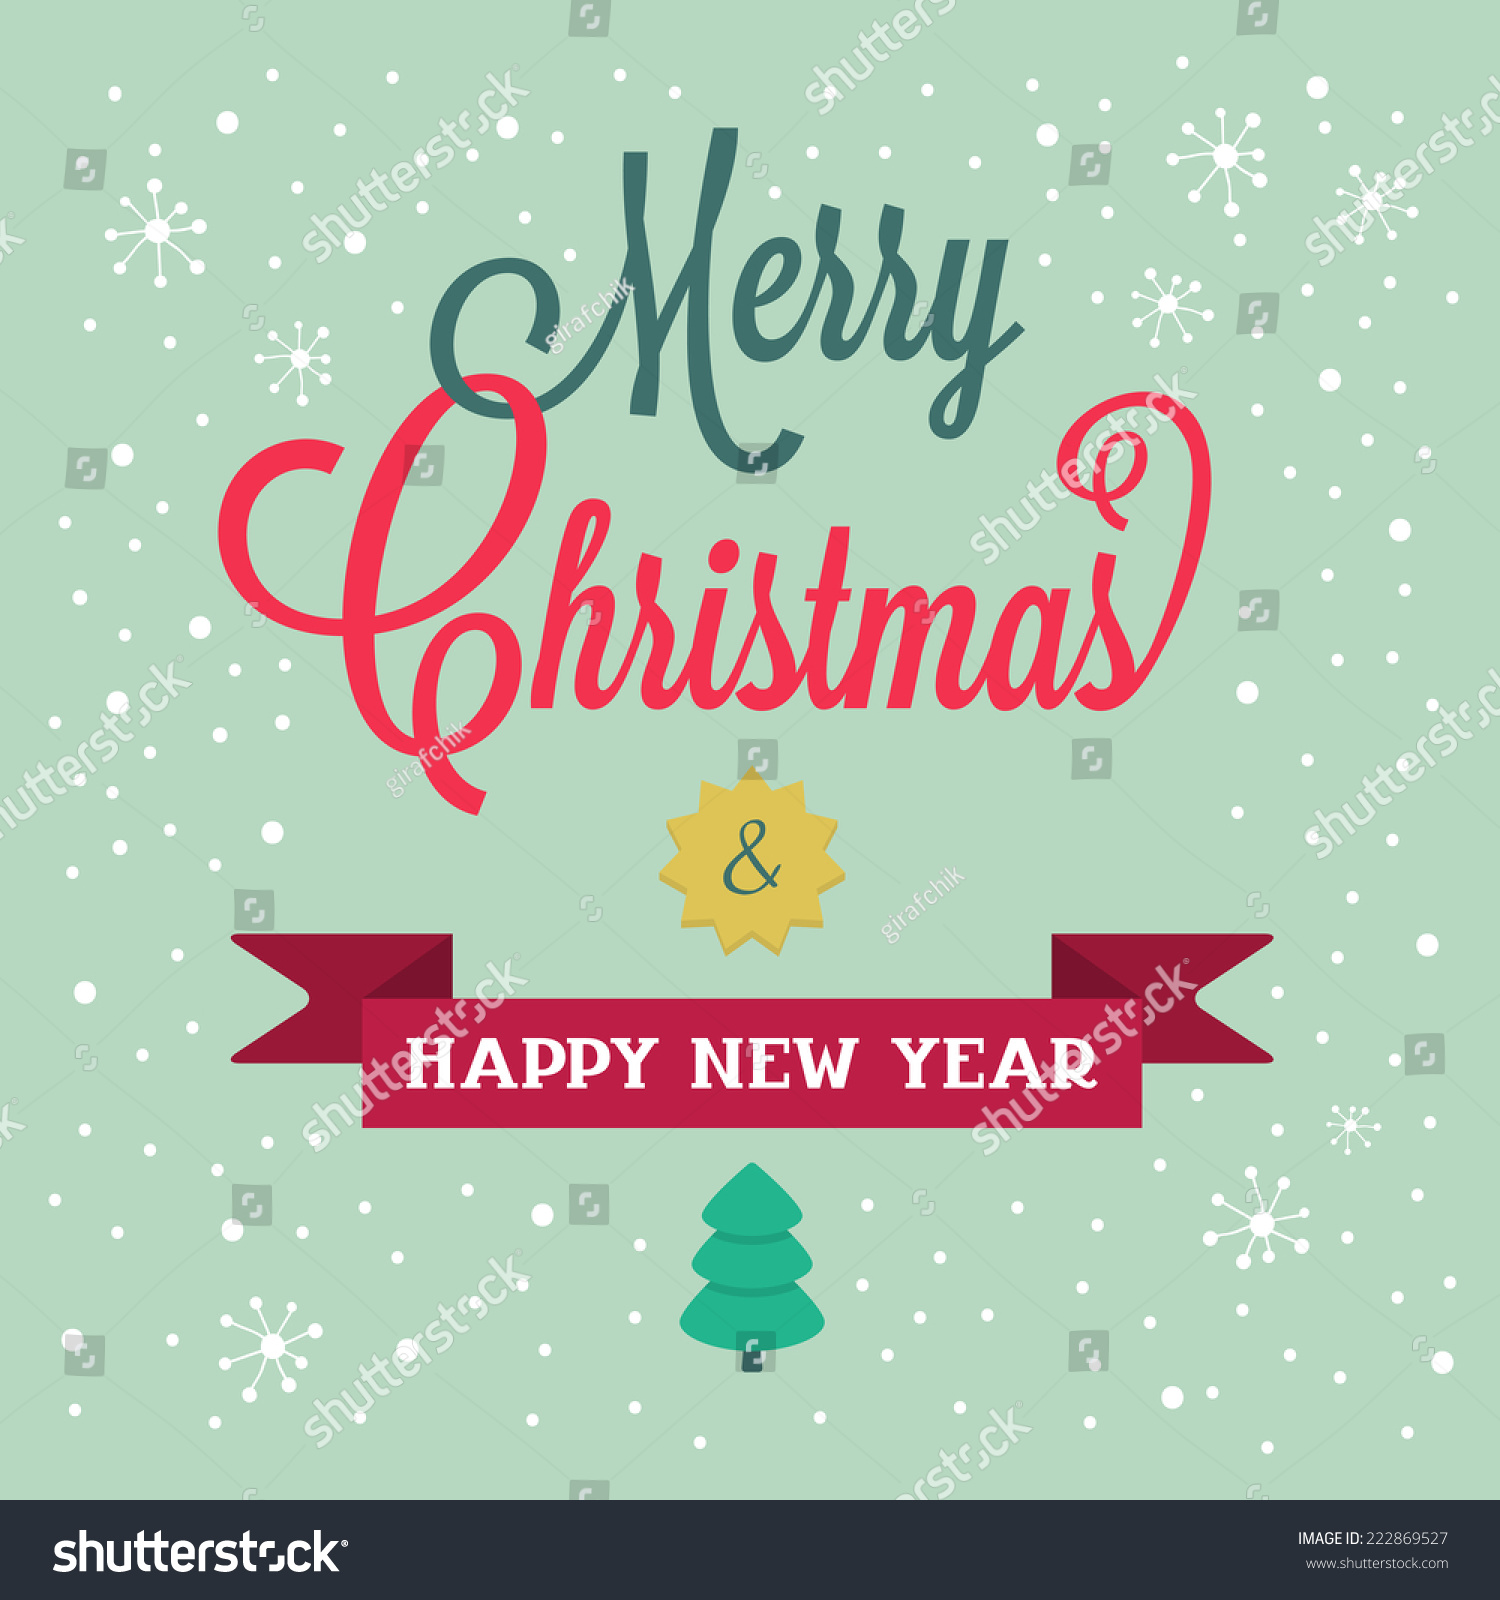 Merry Christmas and Happy New Year poster design